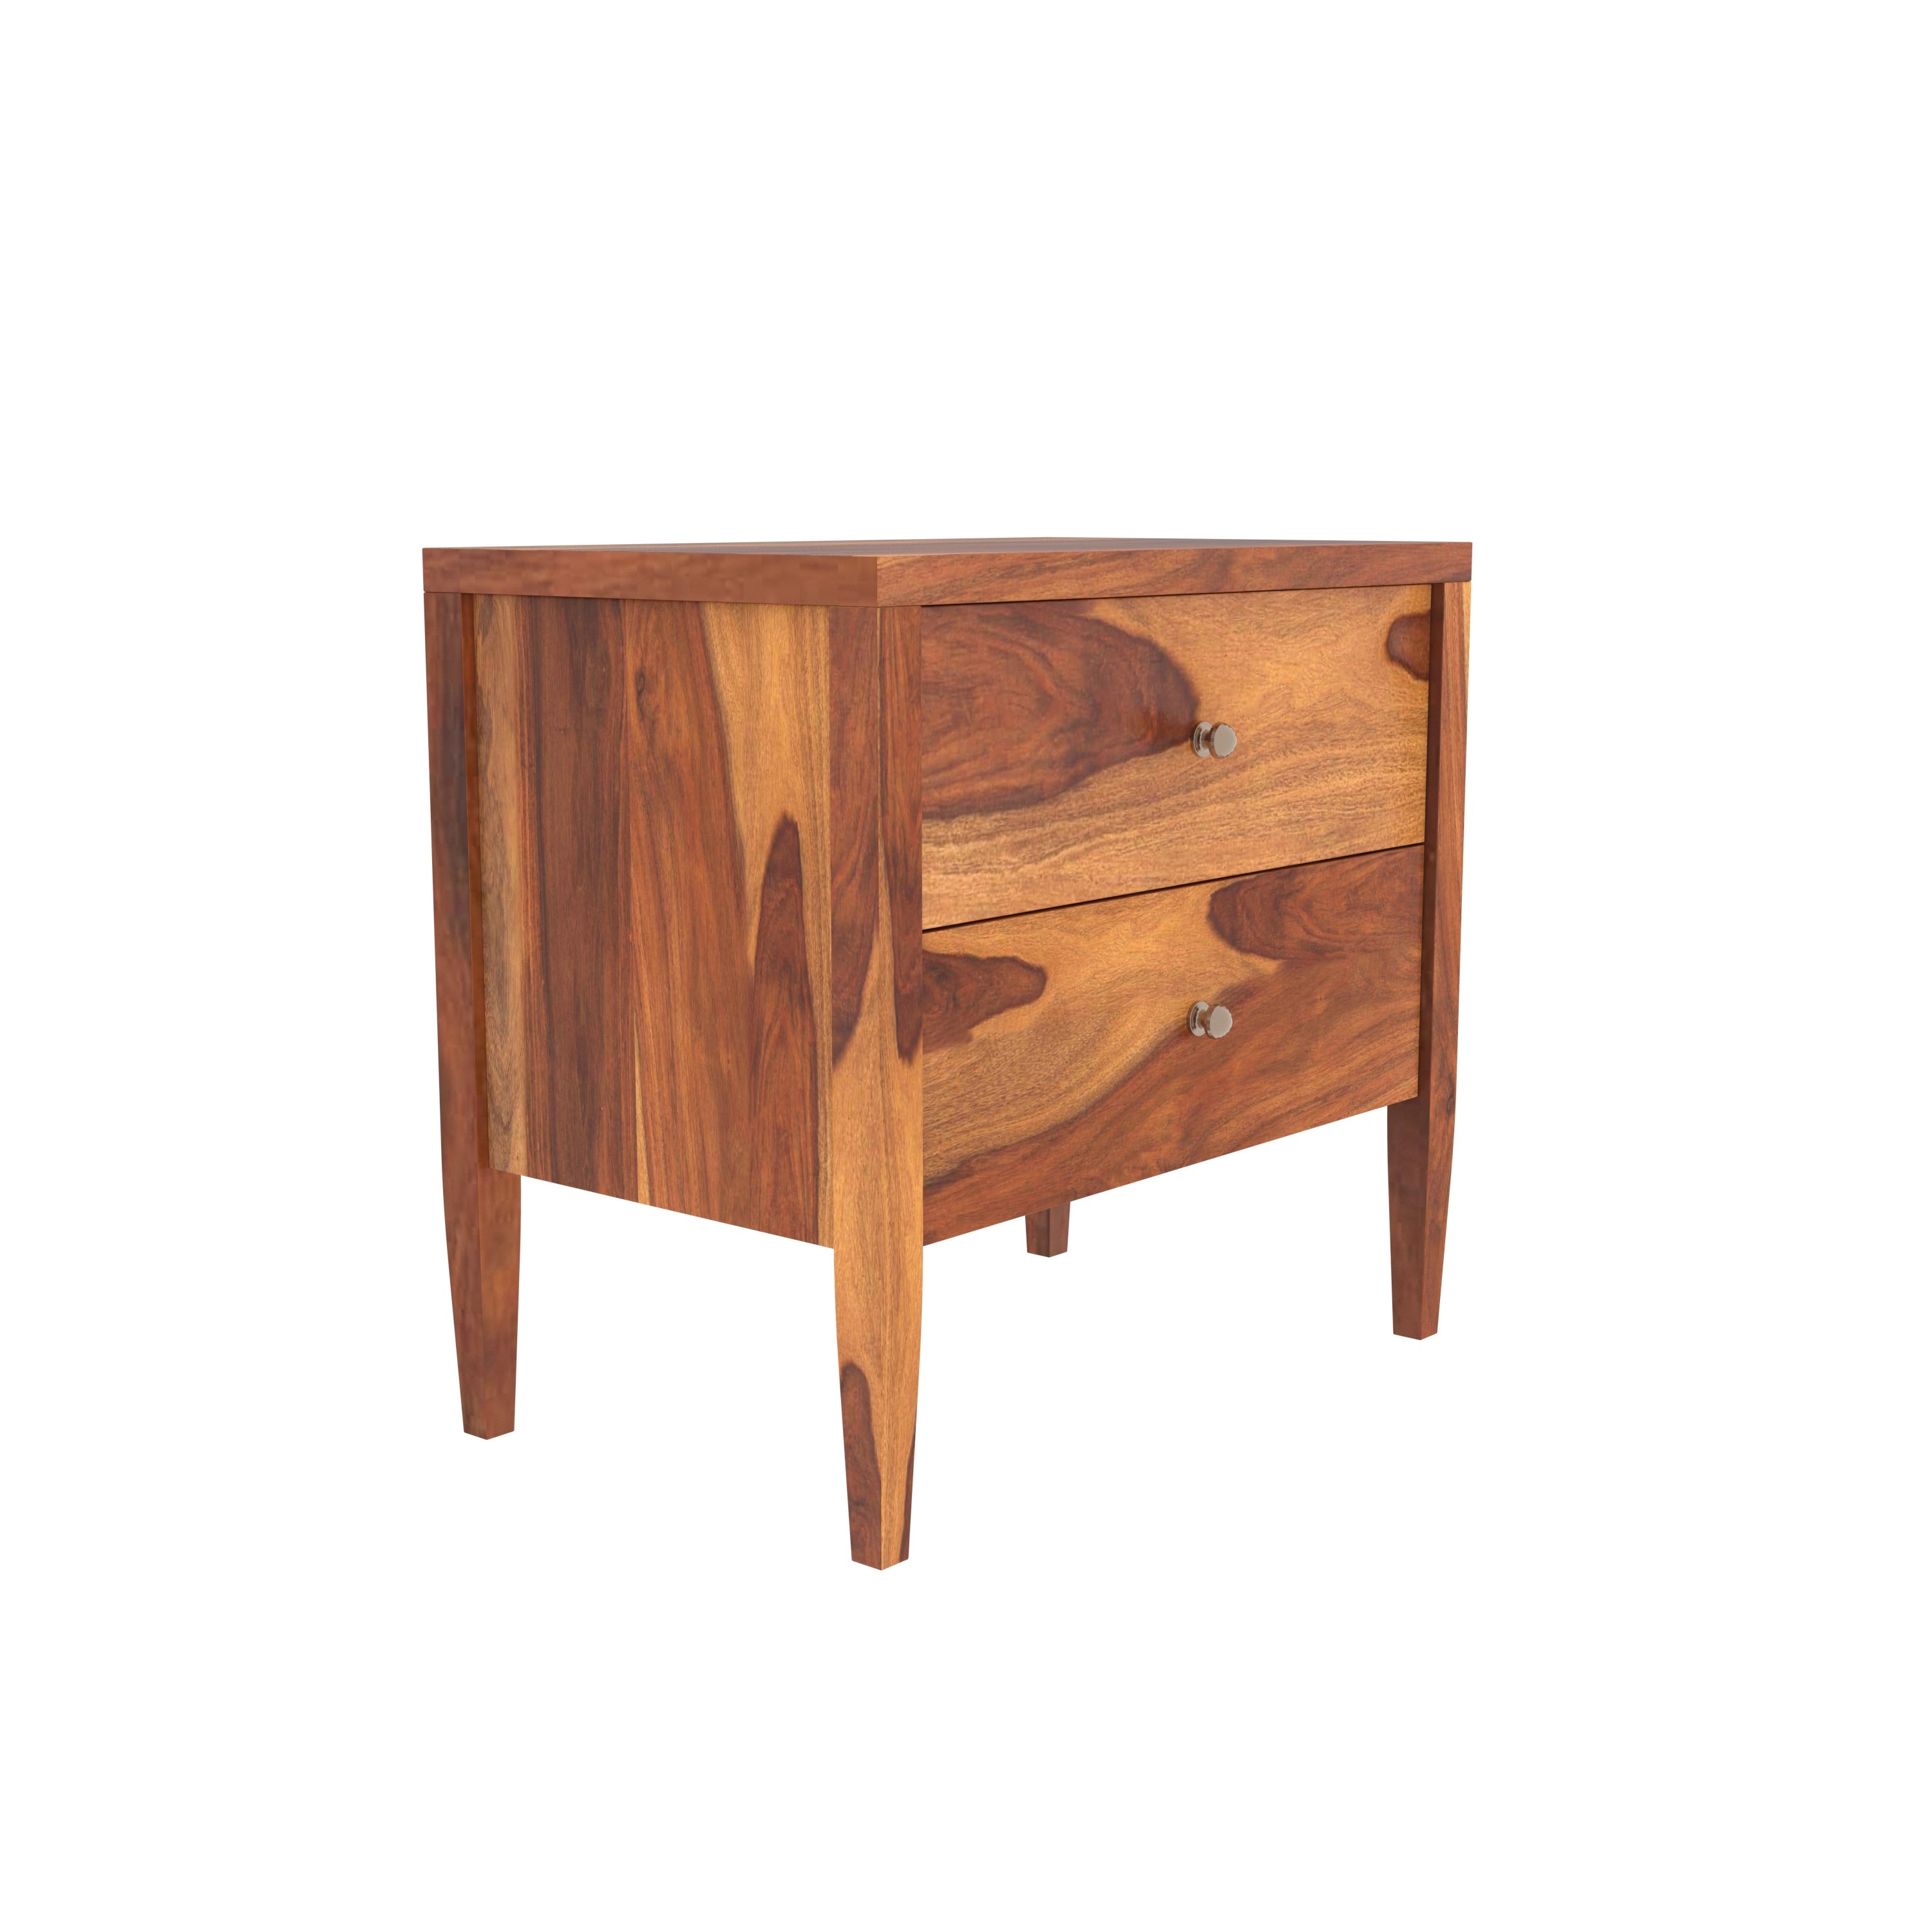 Retro Times wit Rich Texture Handmade Wooden Bedside for Home Bedside